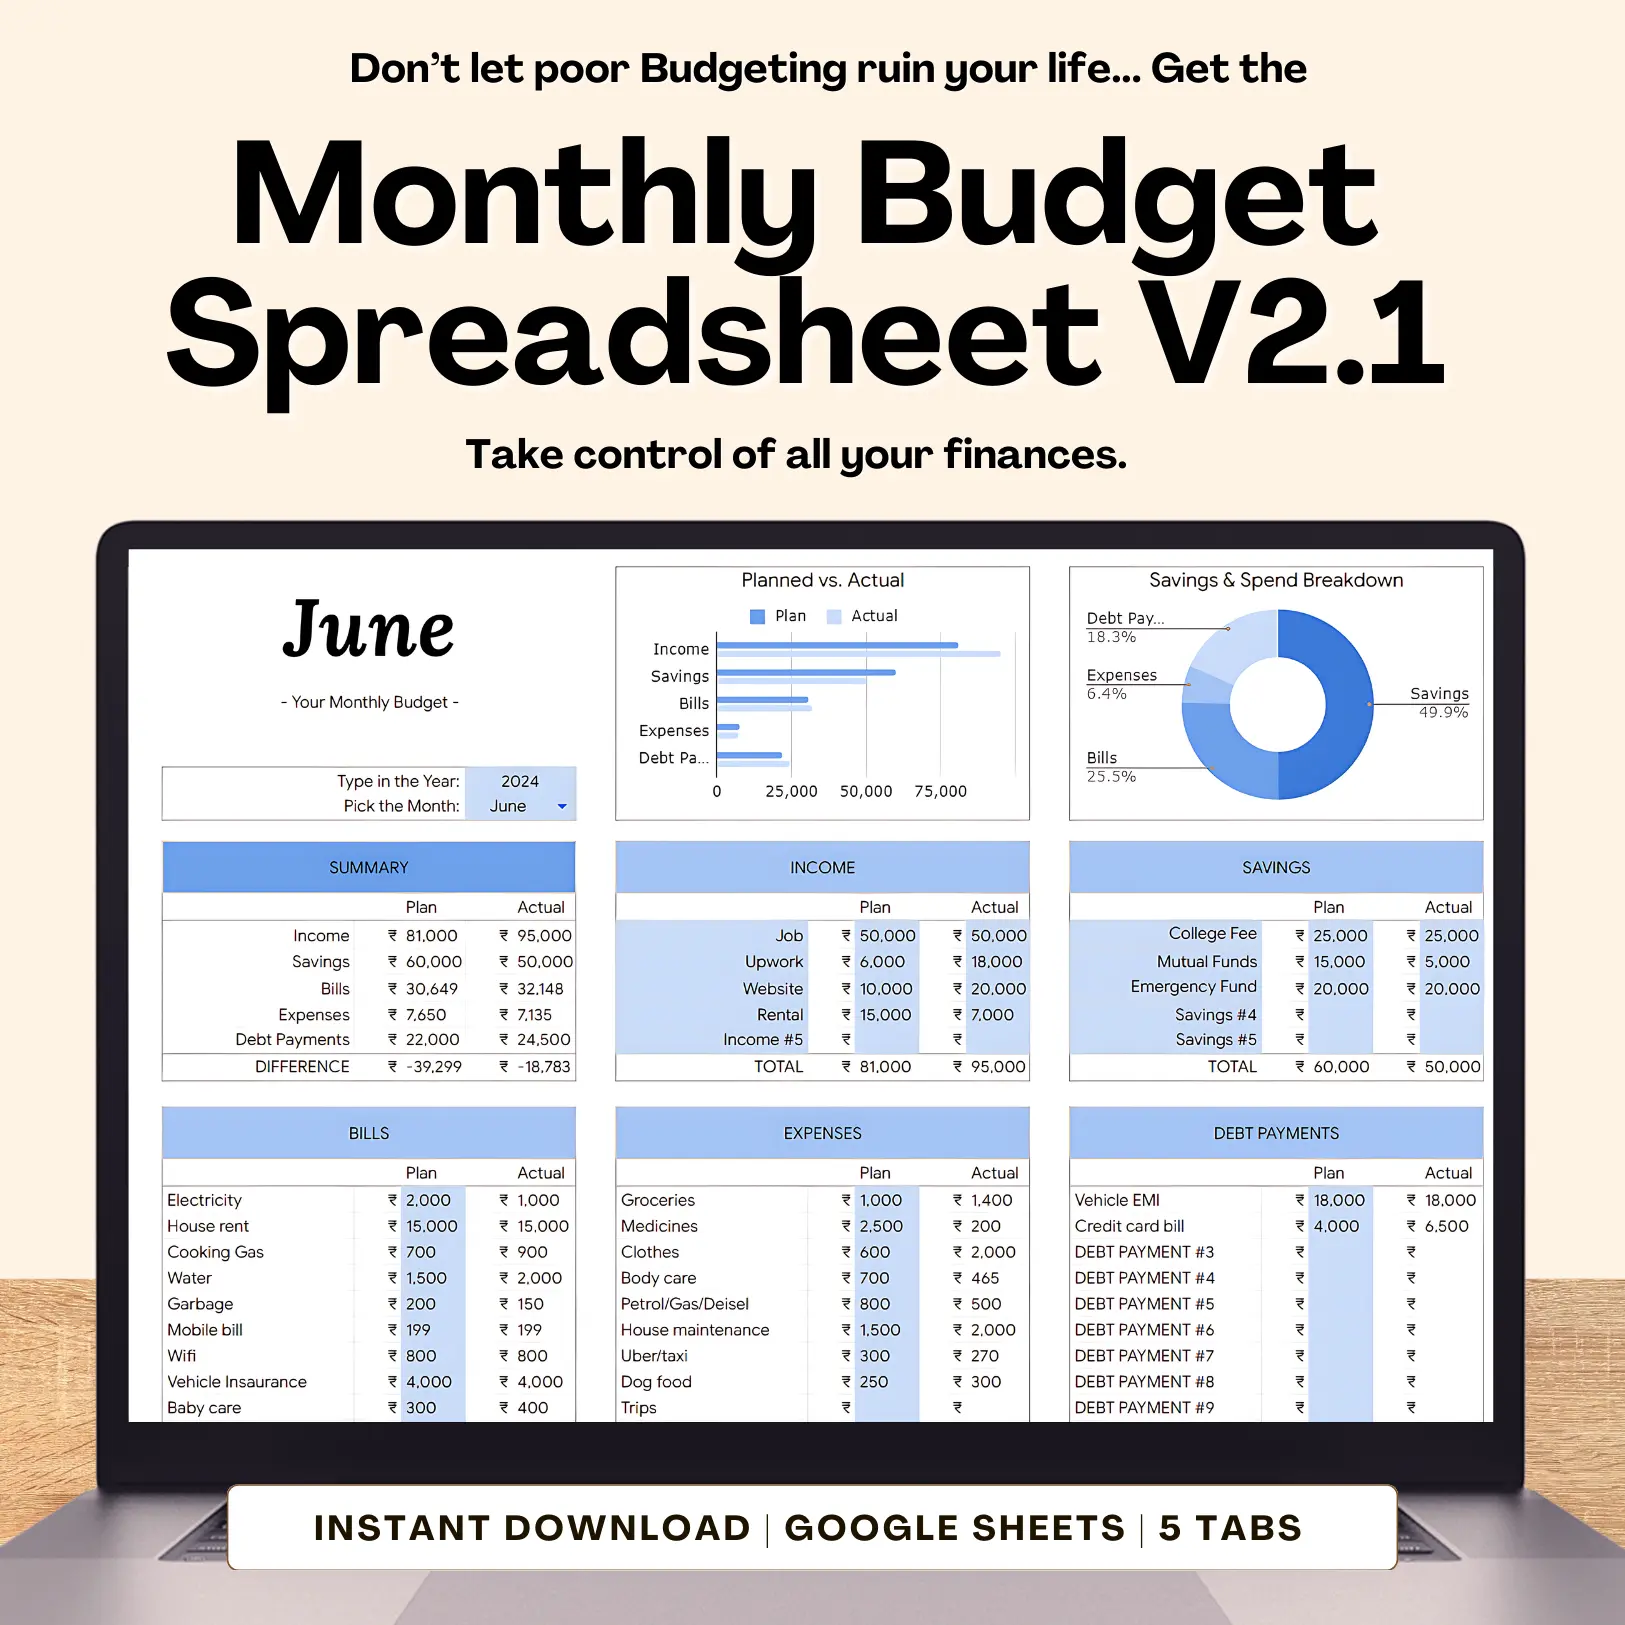 RESELL - MONTHLY BUDGET PLANNING SPREADSHEET V2.1